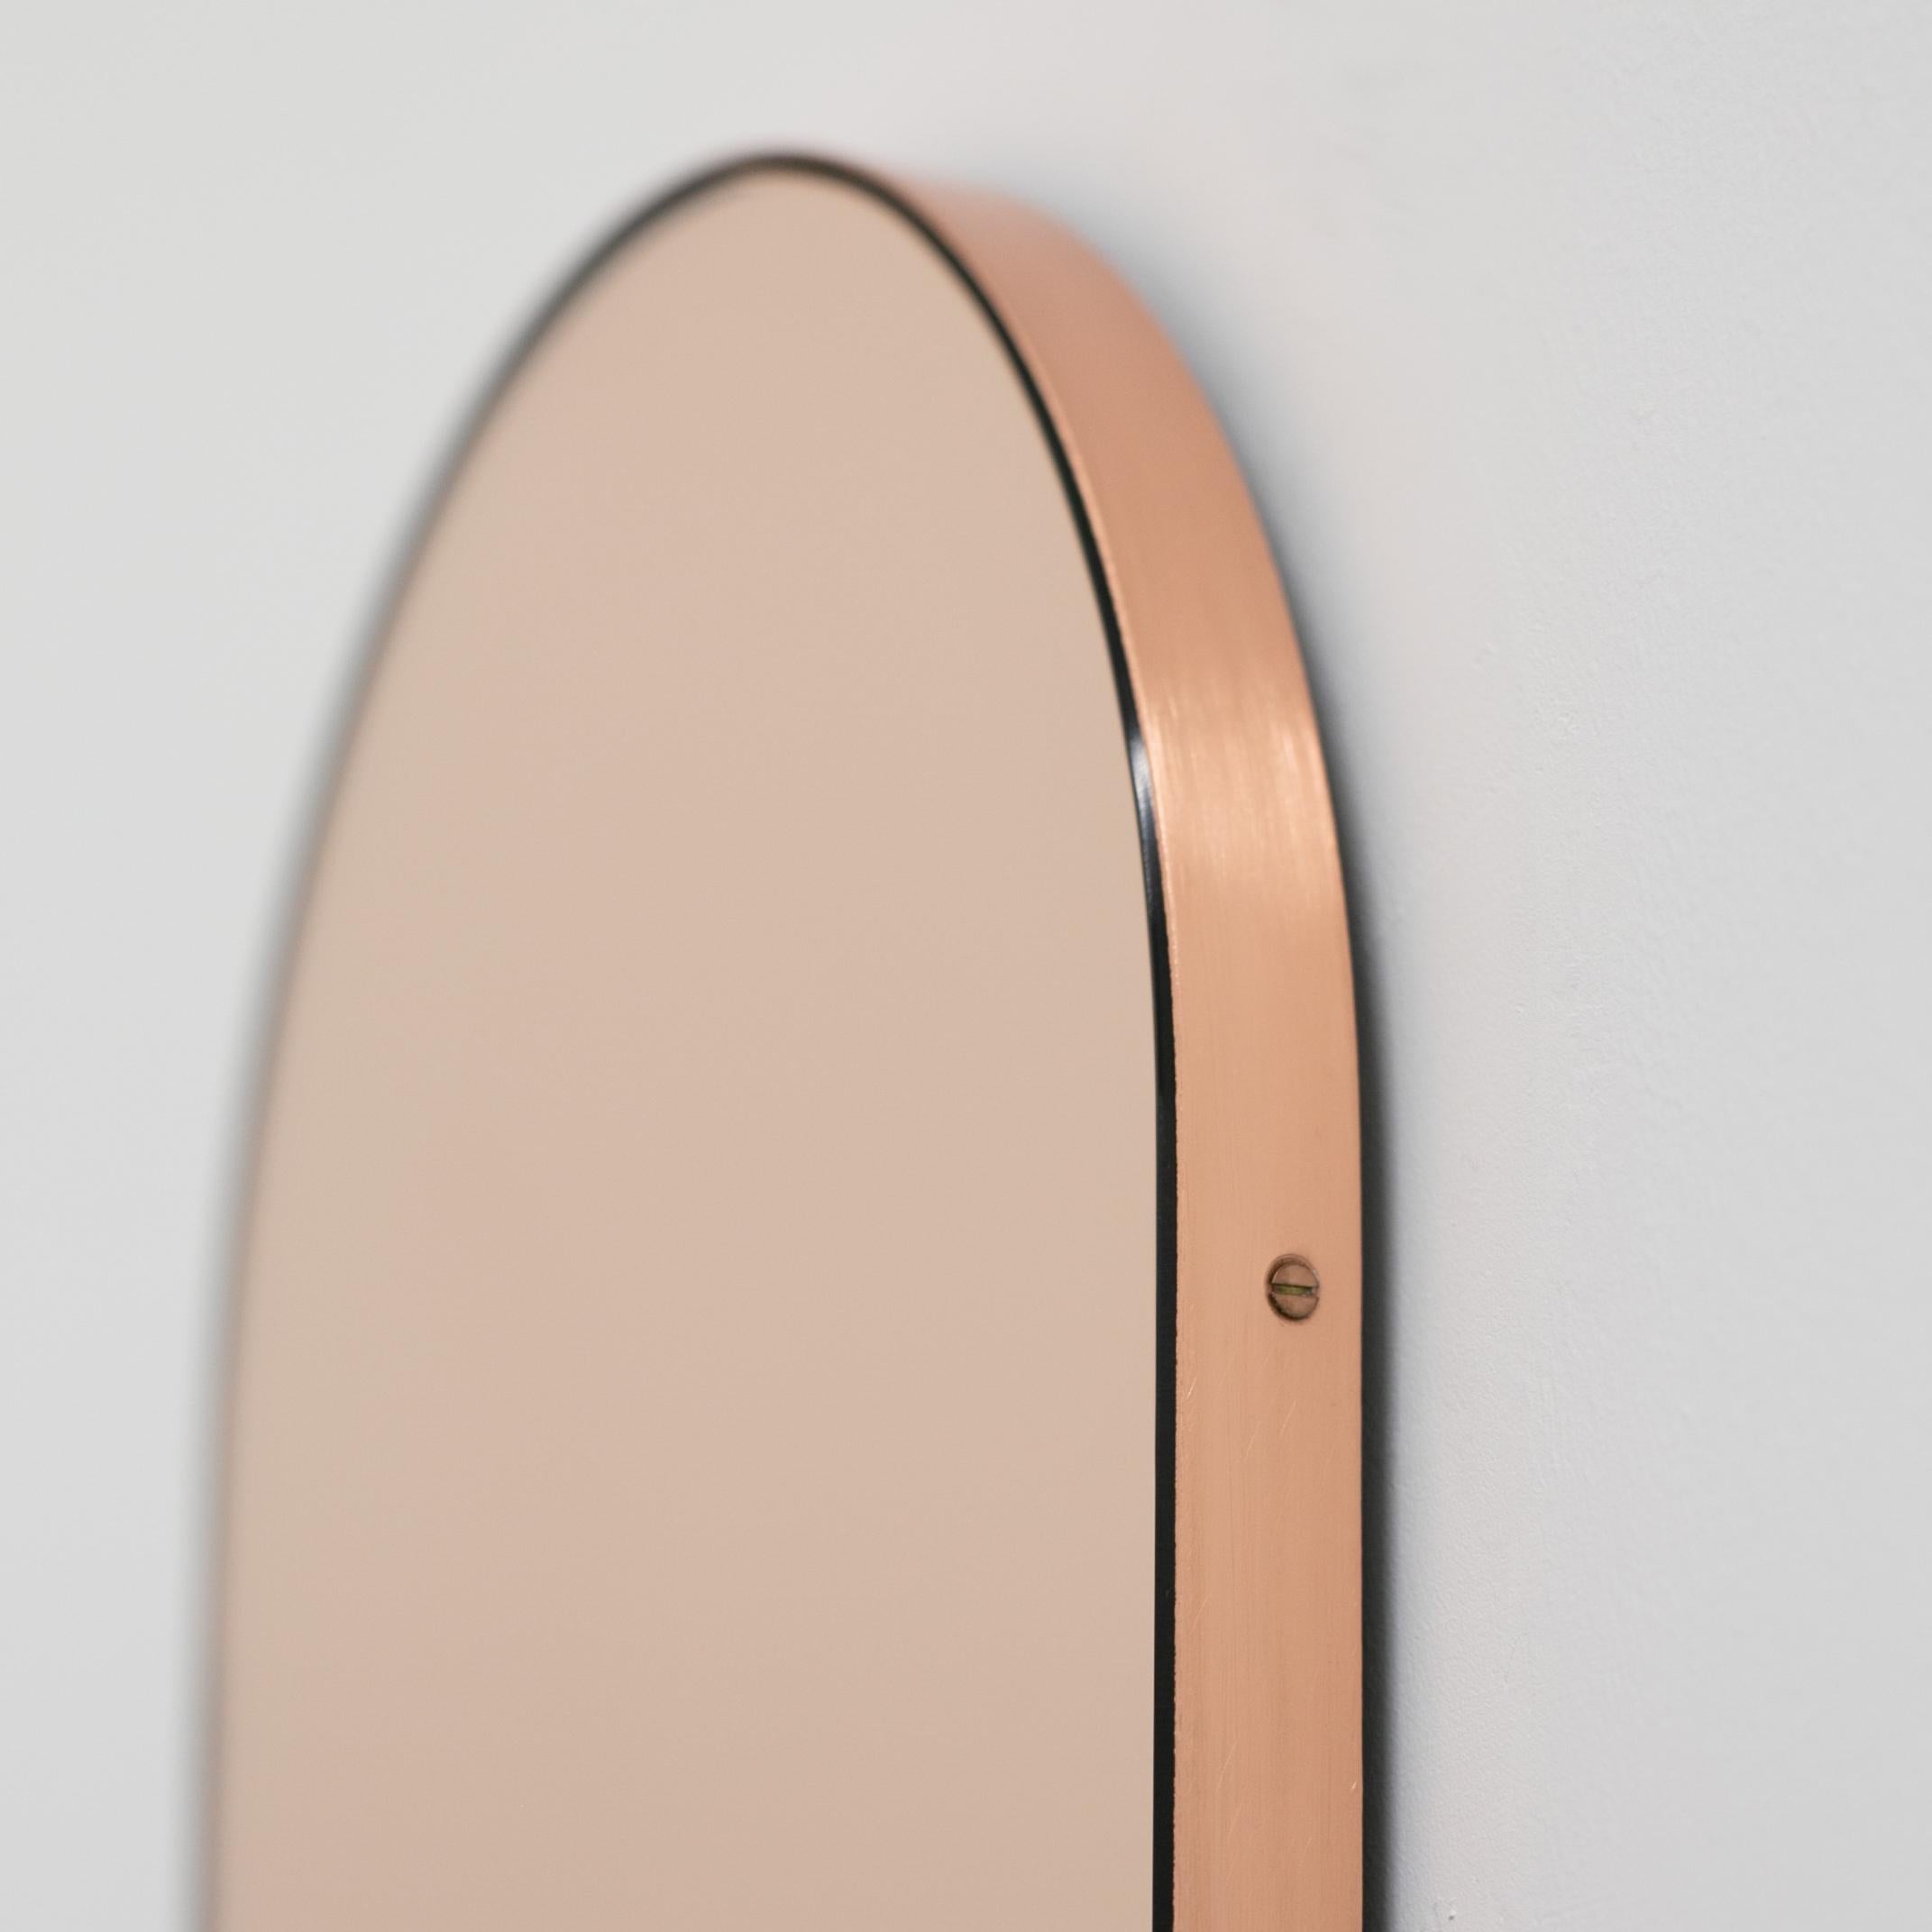 Brushed In Stock Arcus Arched Peach Contemporary Mirror with Copper Frame, Small